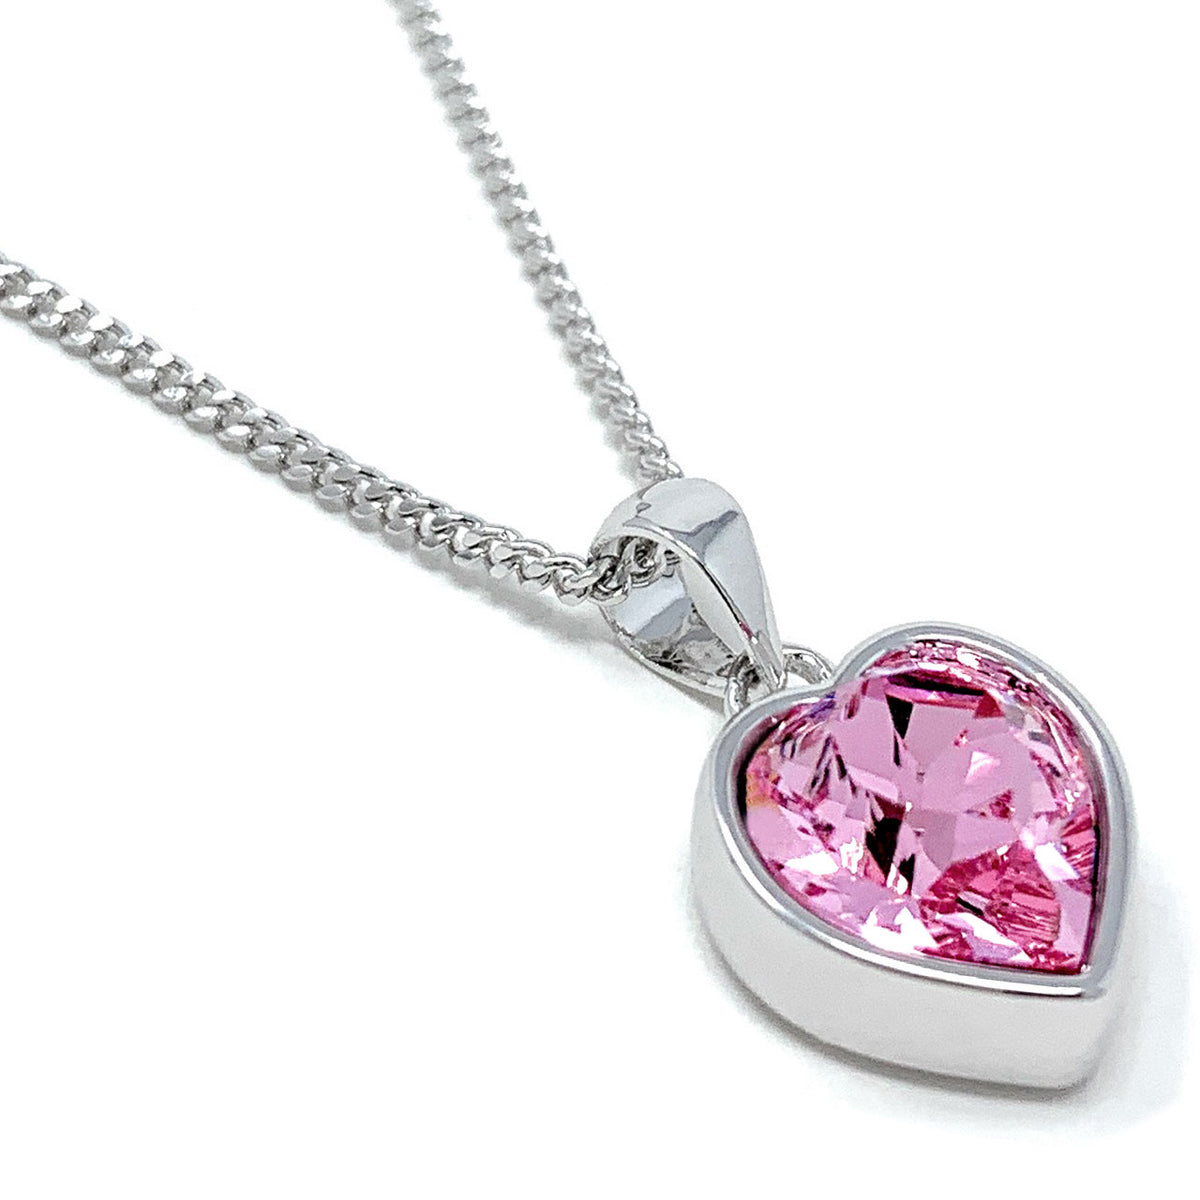 Lucia Pendant Necklace with Pink Light Rose Heart Crystals from Swarovski Silver Toned Rhodium Plated - Ed Heart